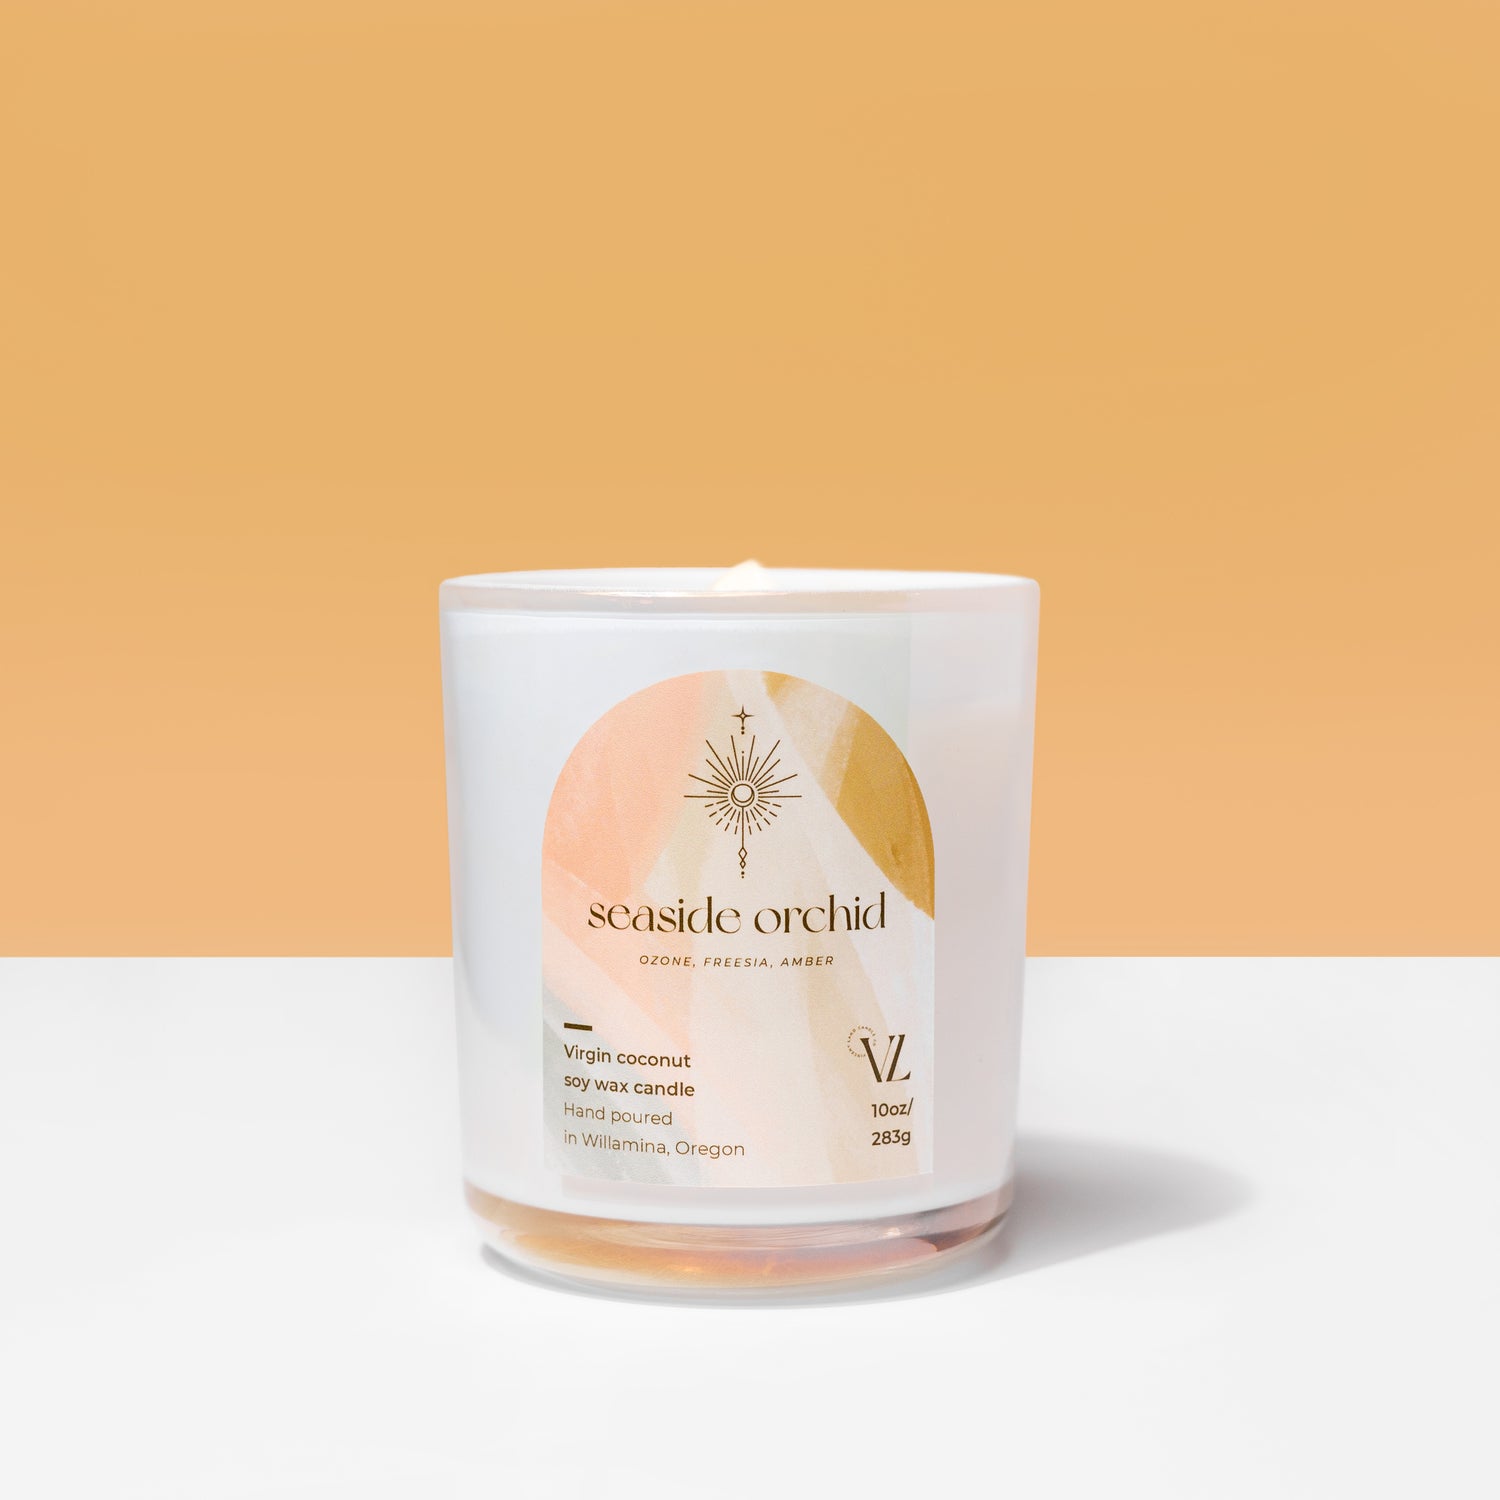 Seaside Orchid coconut soy wax candle | Ozone, freesia, amber - Vincent Land Candle Co.